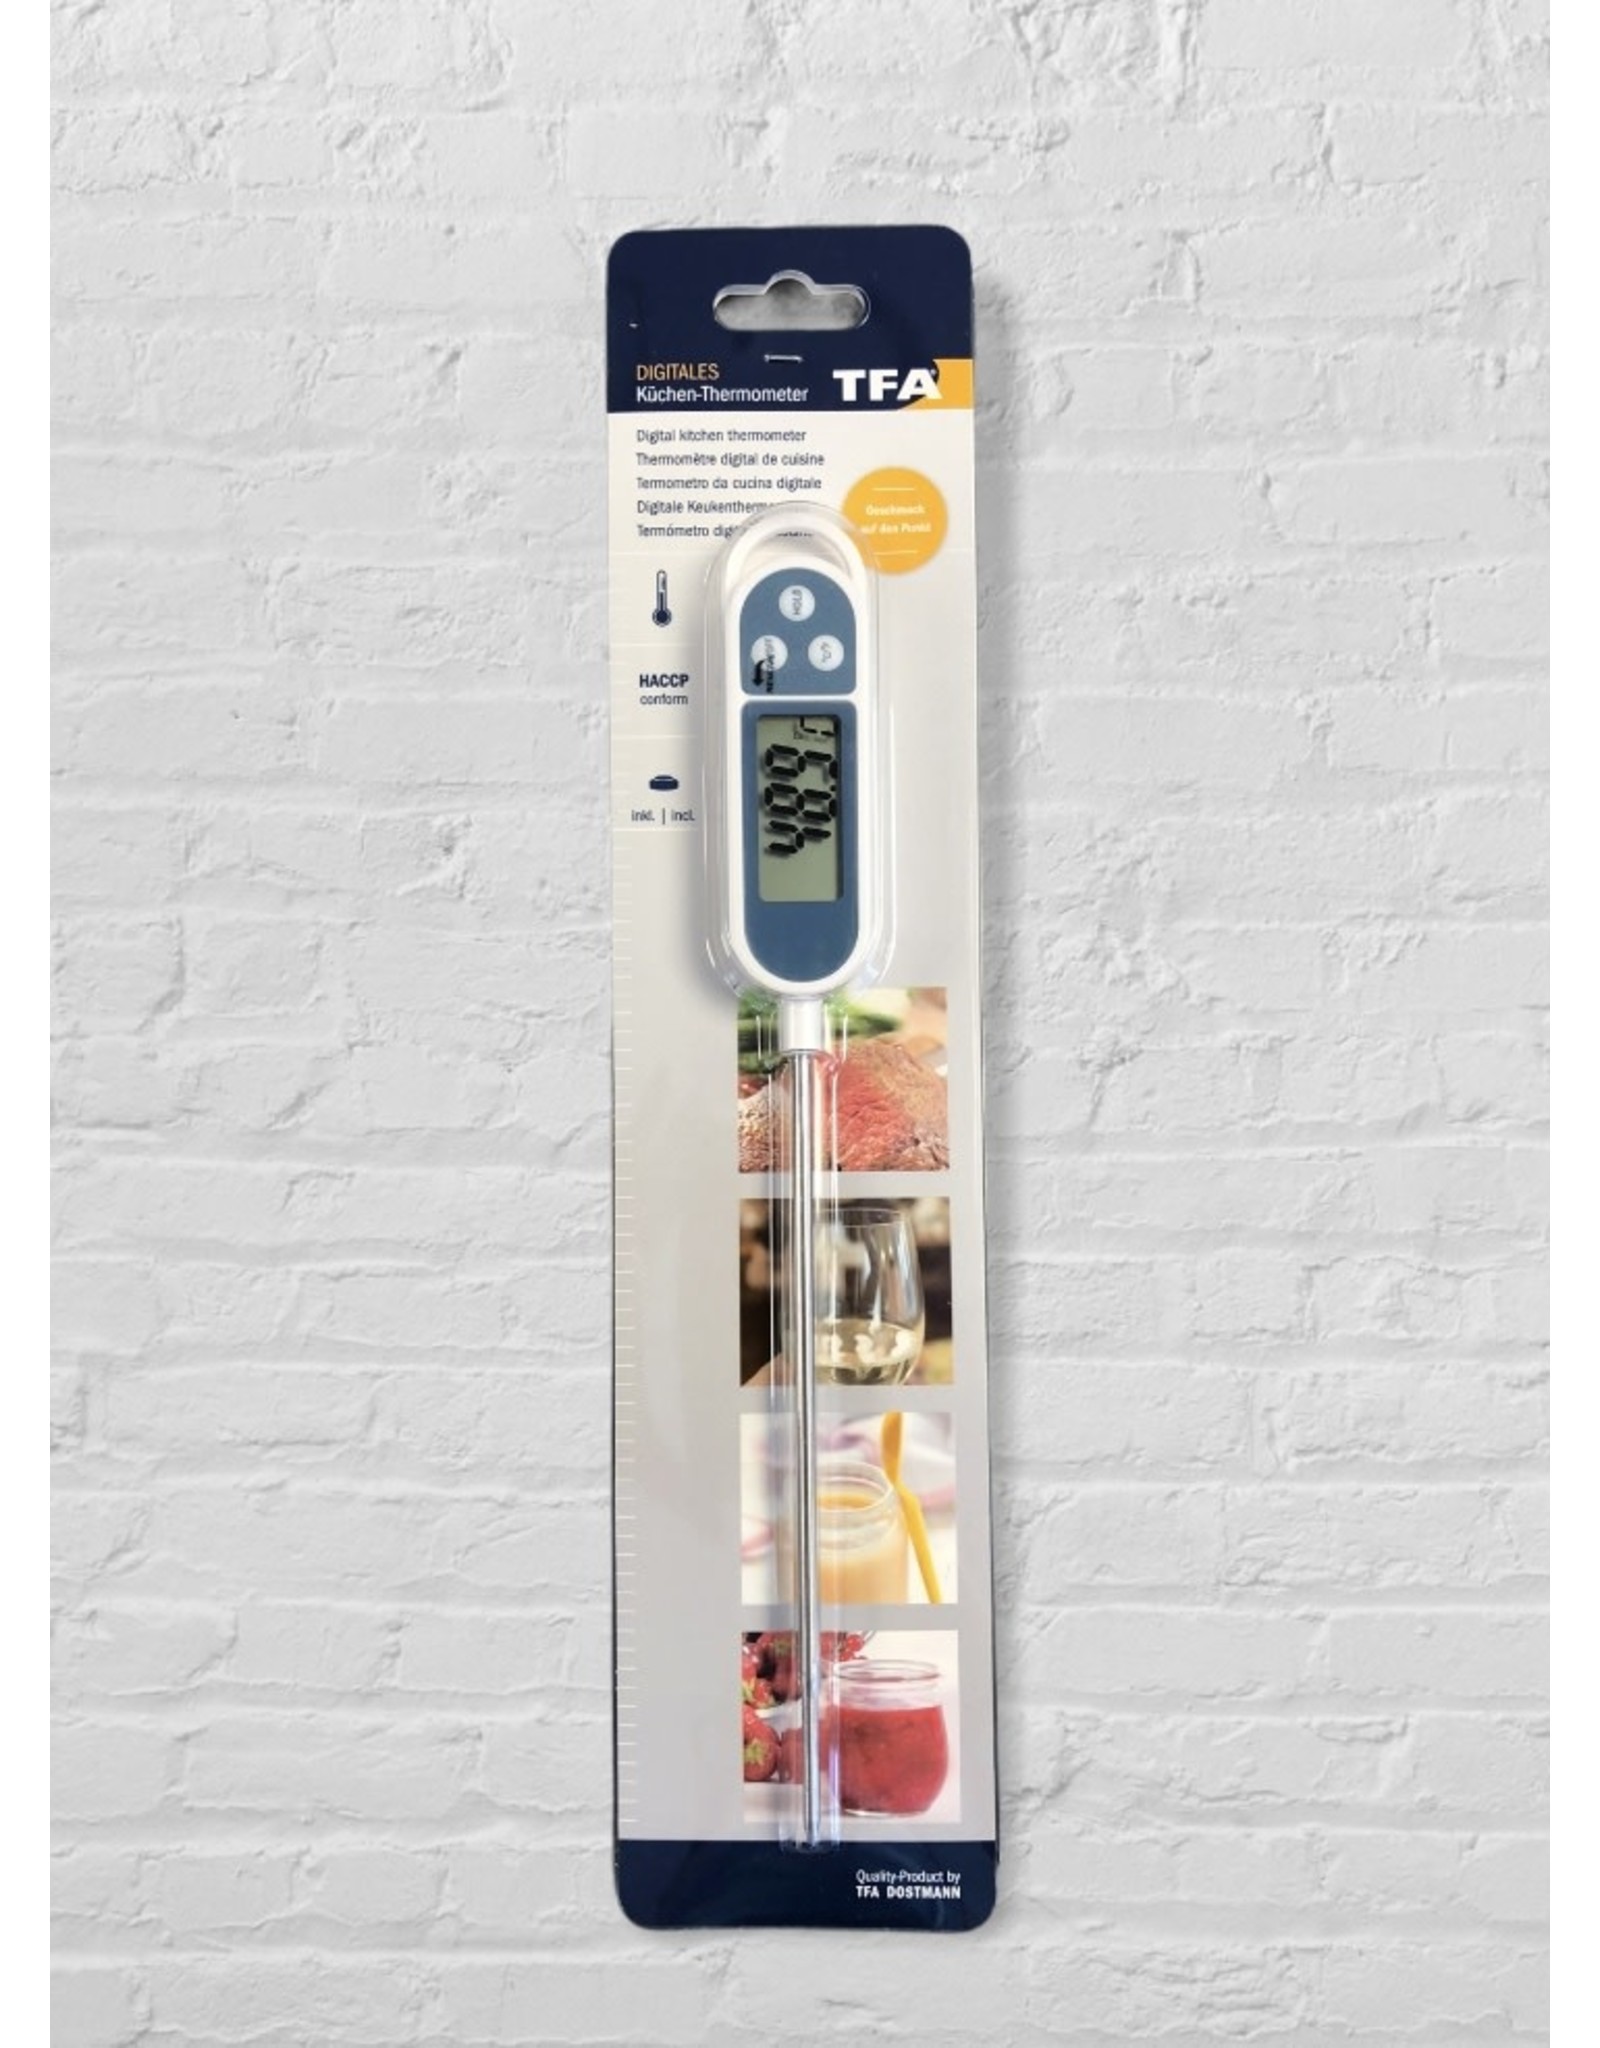 Thermometer - Digitale Kernthermometer